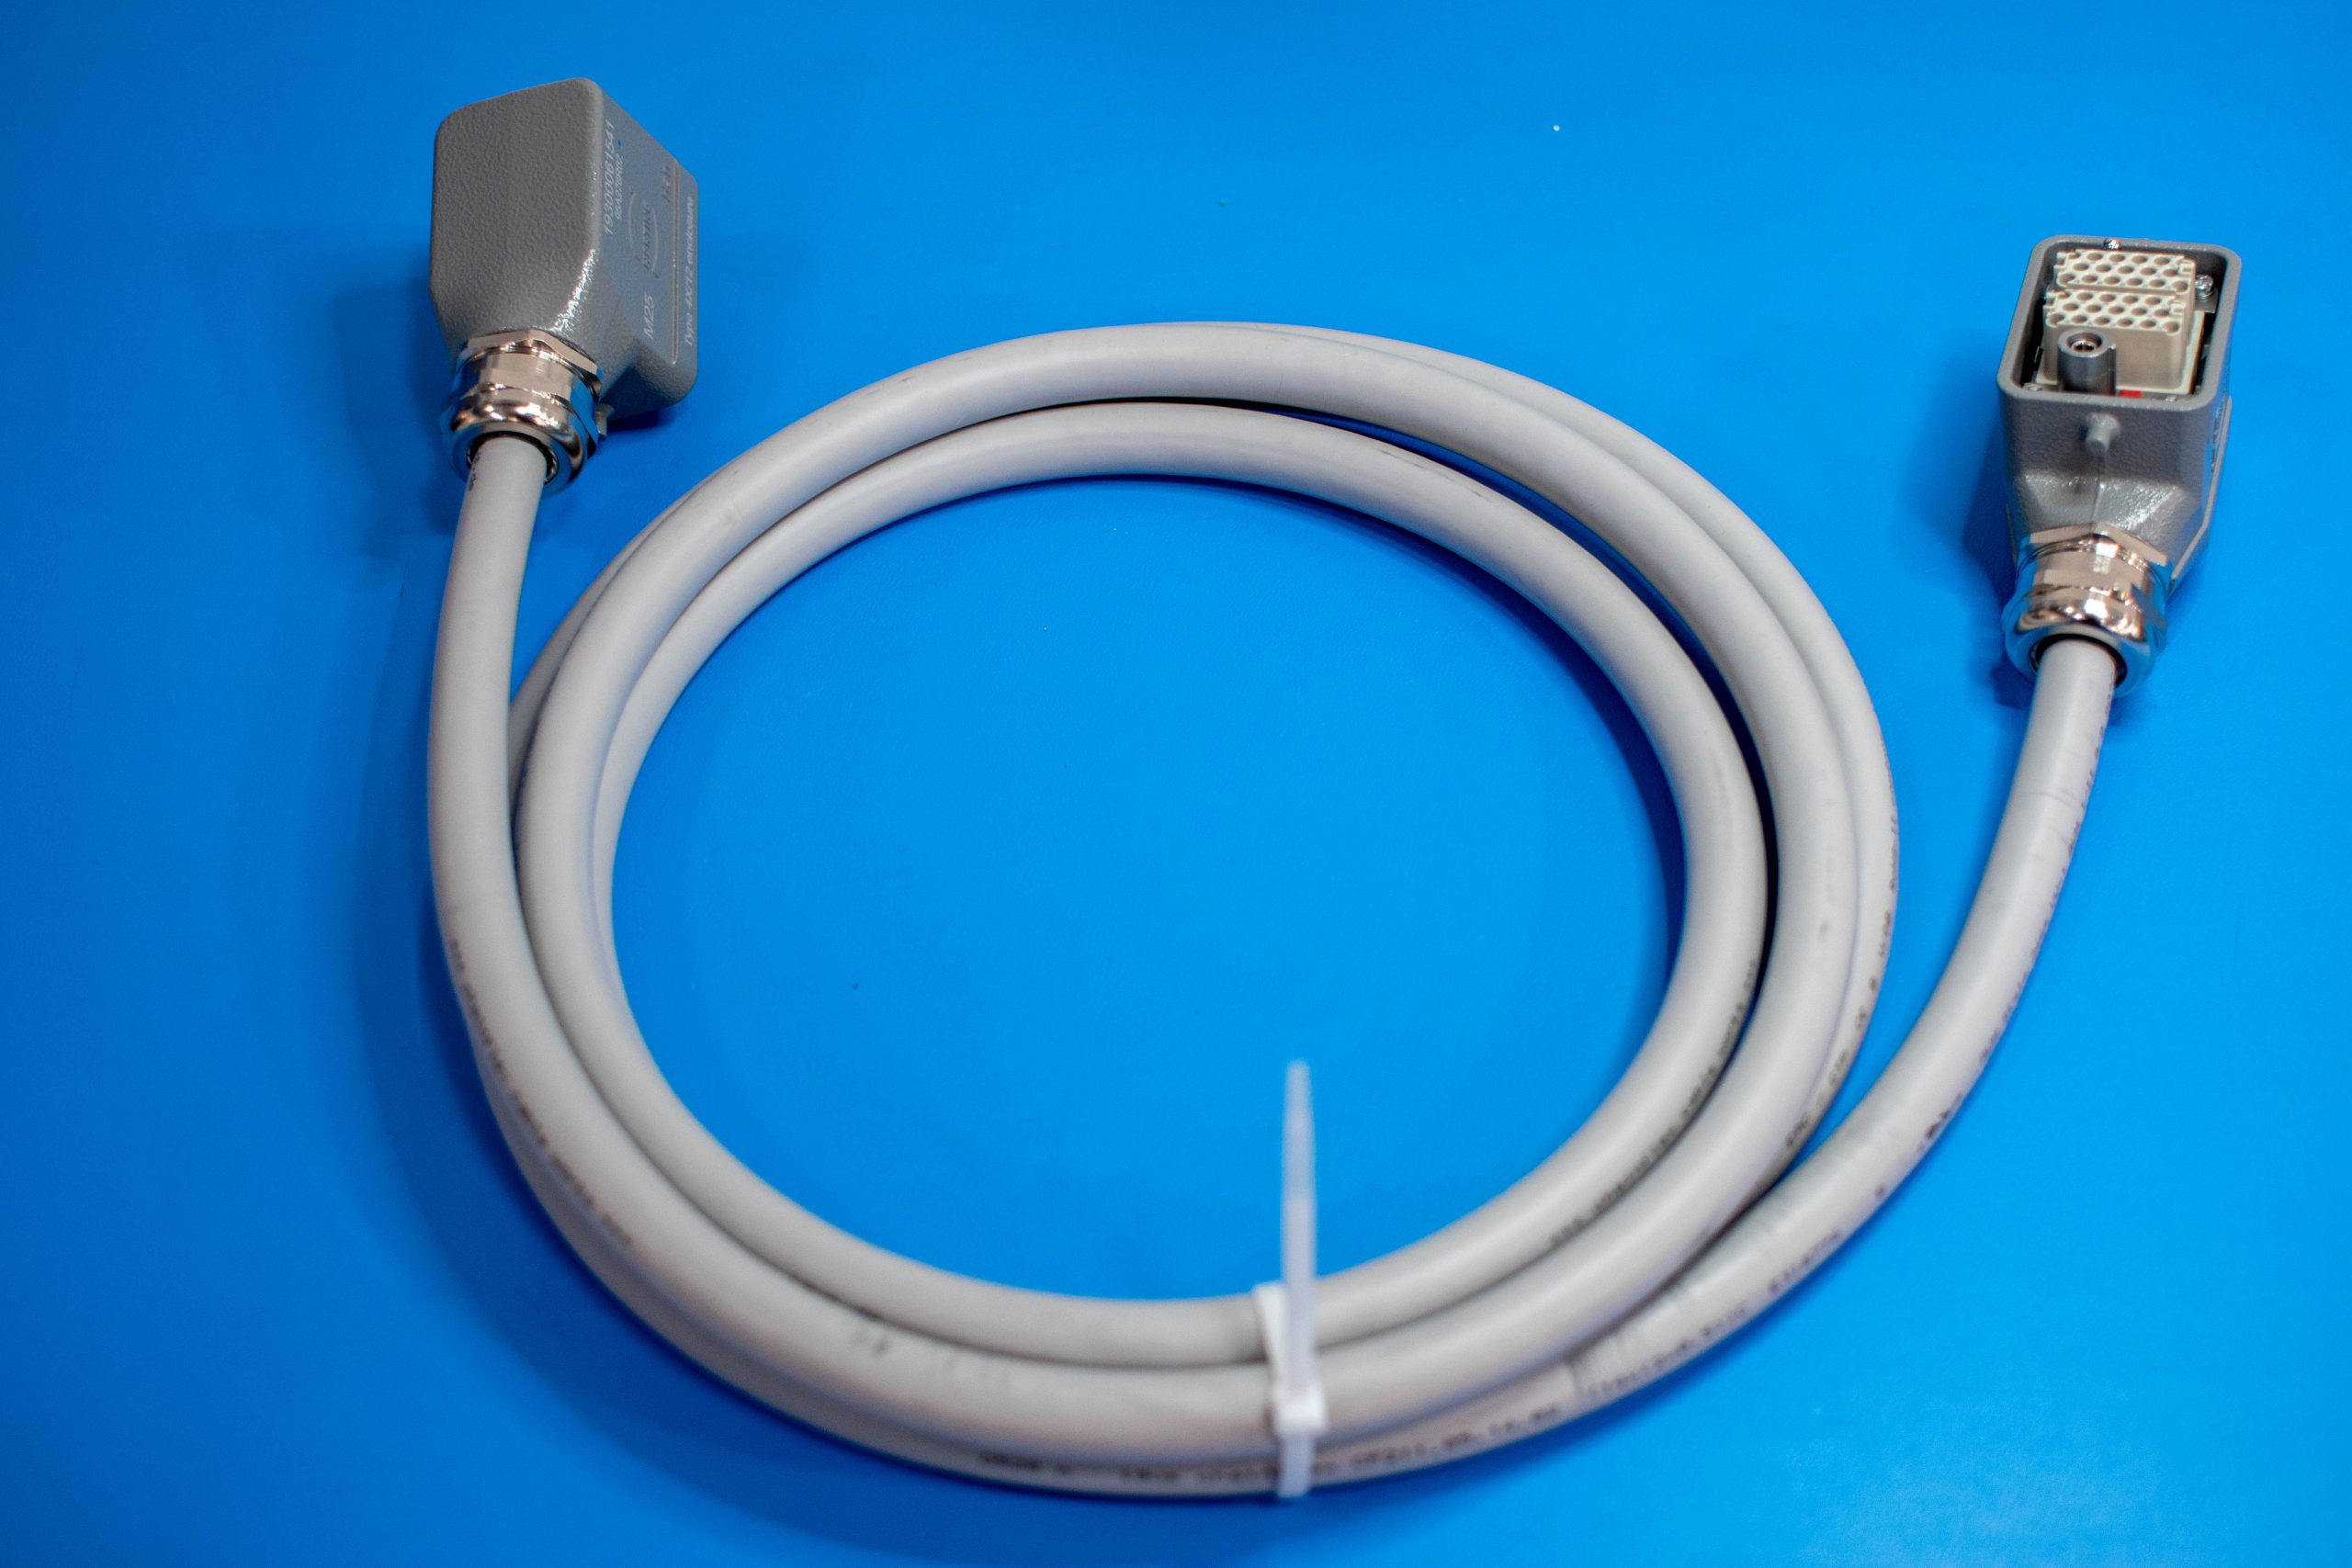 Cable Harness Example from EFE Labs